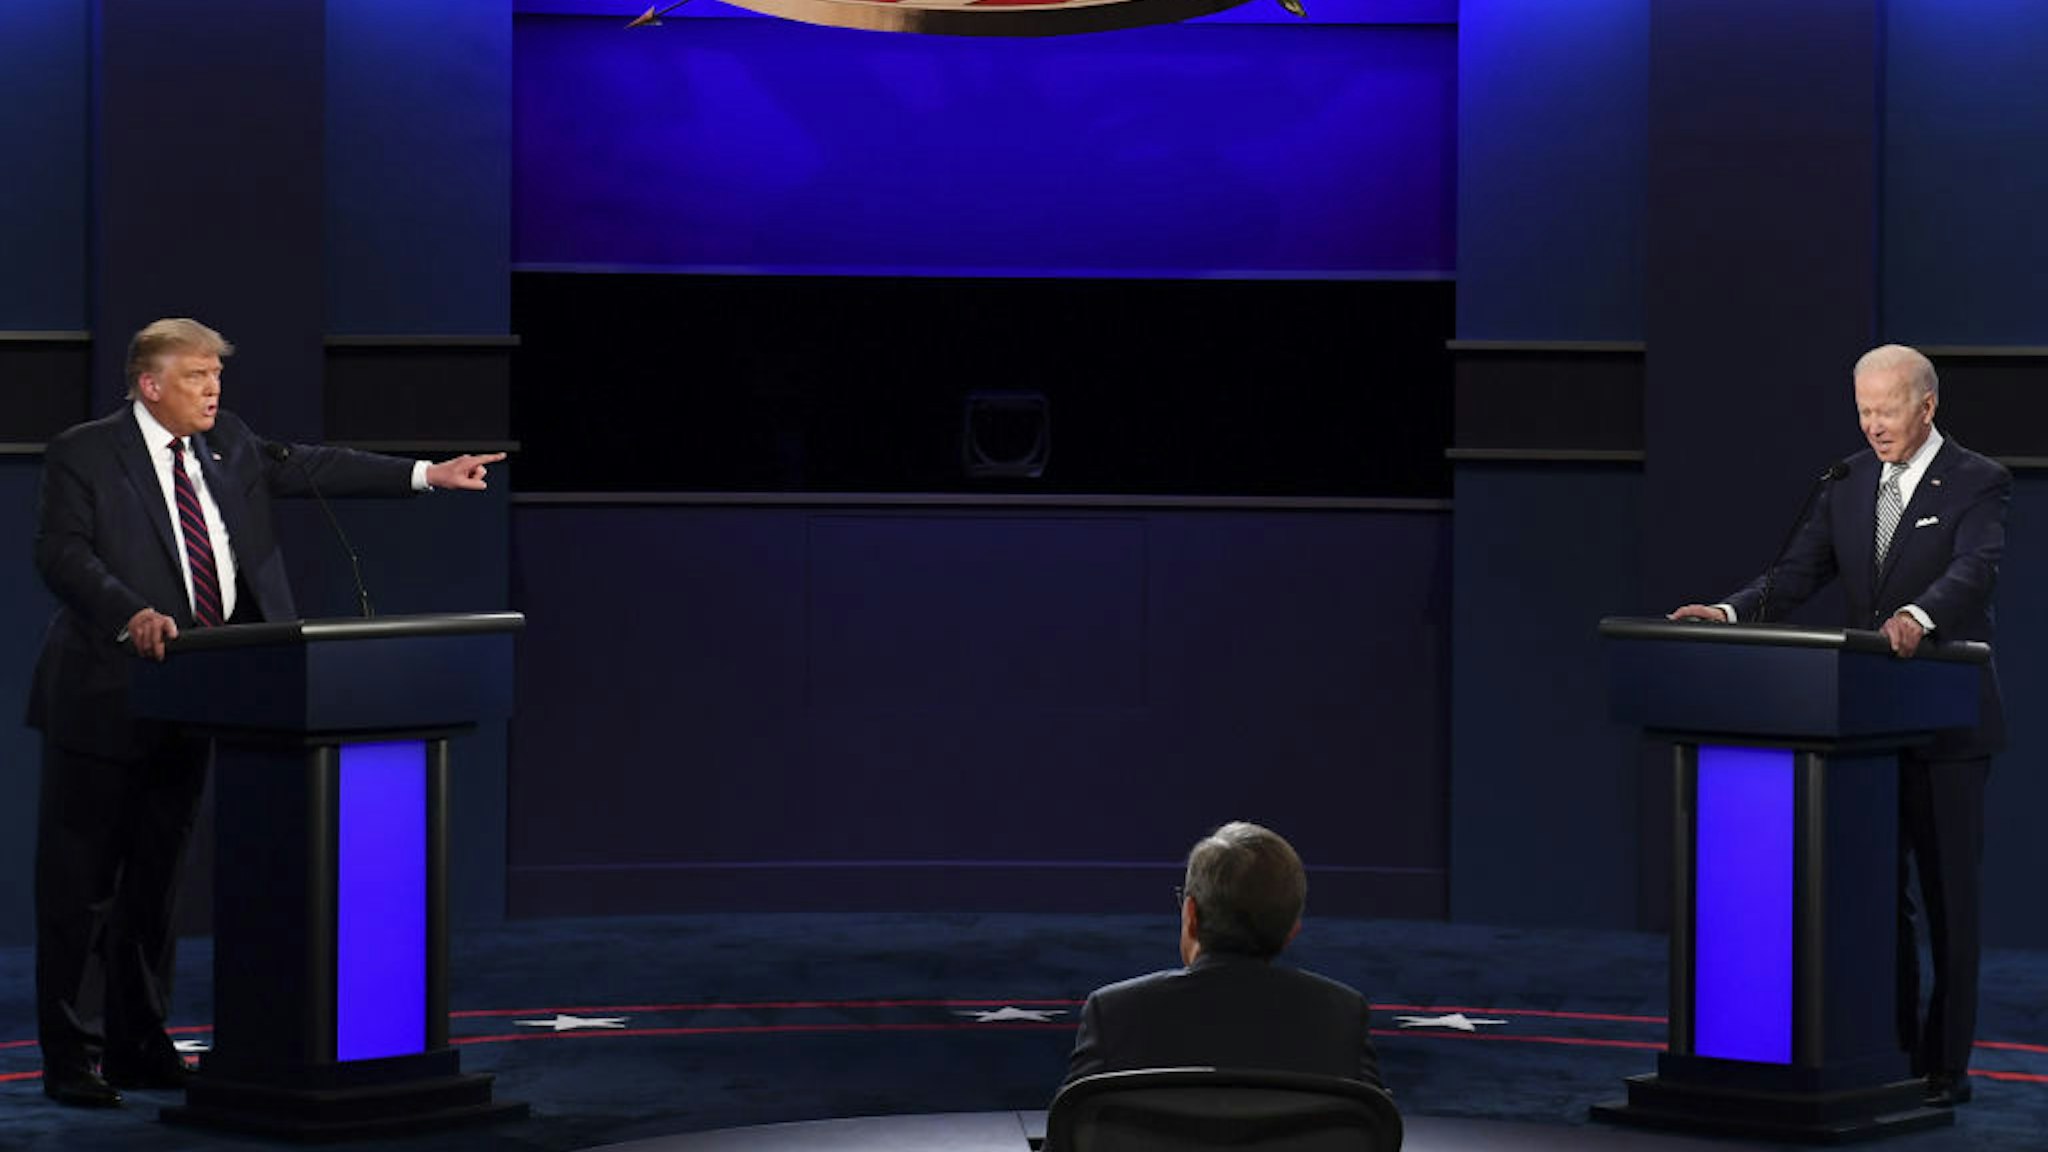 U.S. President Donald Trump, left, speaks as Joe Biden, 2020 Democratic presidential nominee, listens during the first U.S. presidential debate hosted by Case Western Reserve University and the Cleveland Clinic in Cleveland, Ohio, U.S., on Tuesday, Sept. 29, 2020. Trump and Biden kick off their first debate with contentious topics like the Supreme Court and the coronavirus pandemic suddenly joined by yet another potentially explosive question -- whether the president ducked paying his taxes. Photographer: Kevin Dietsch/UPI/Bloomberg via Getty Images